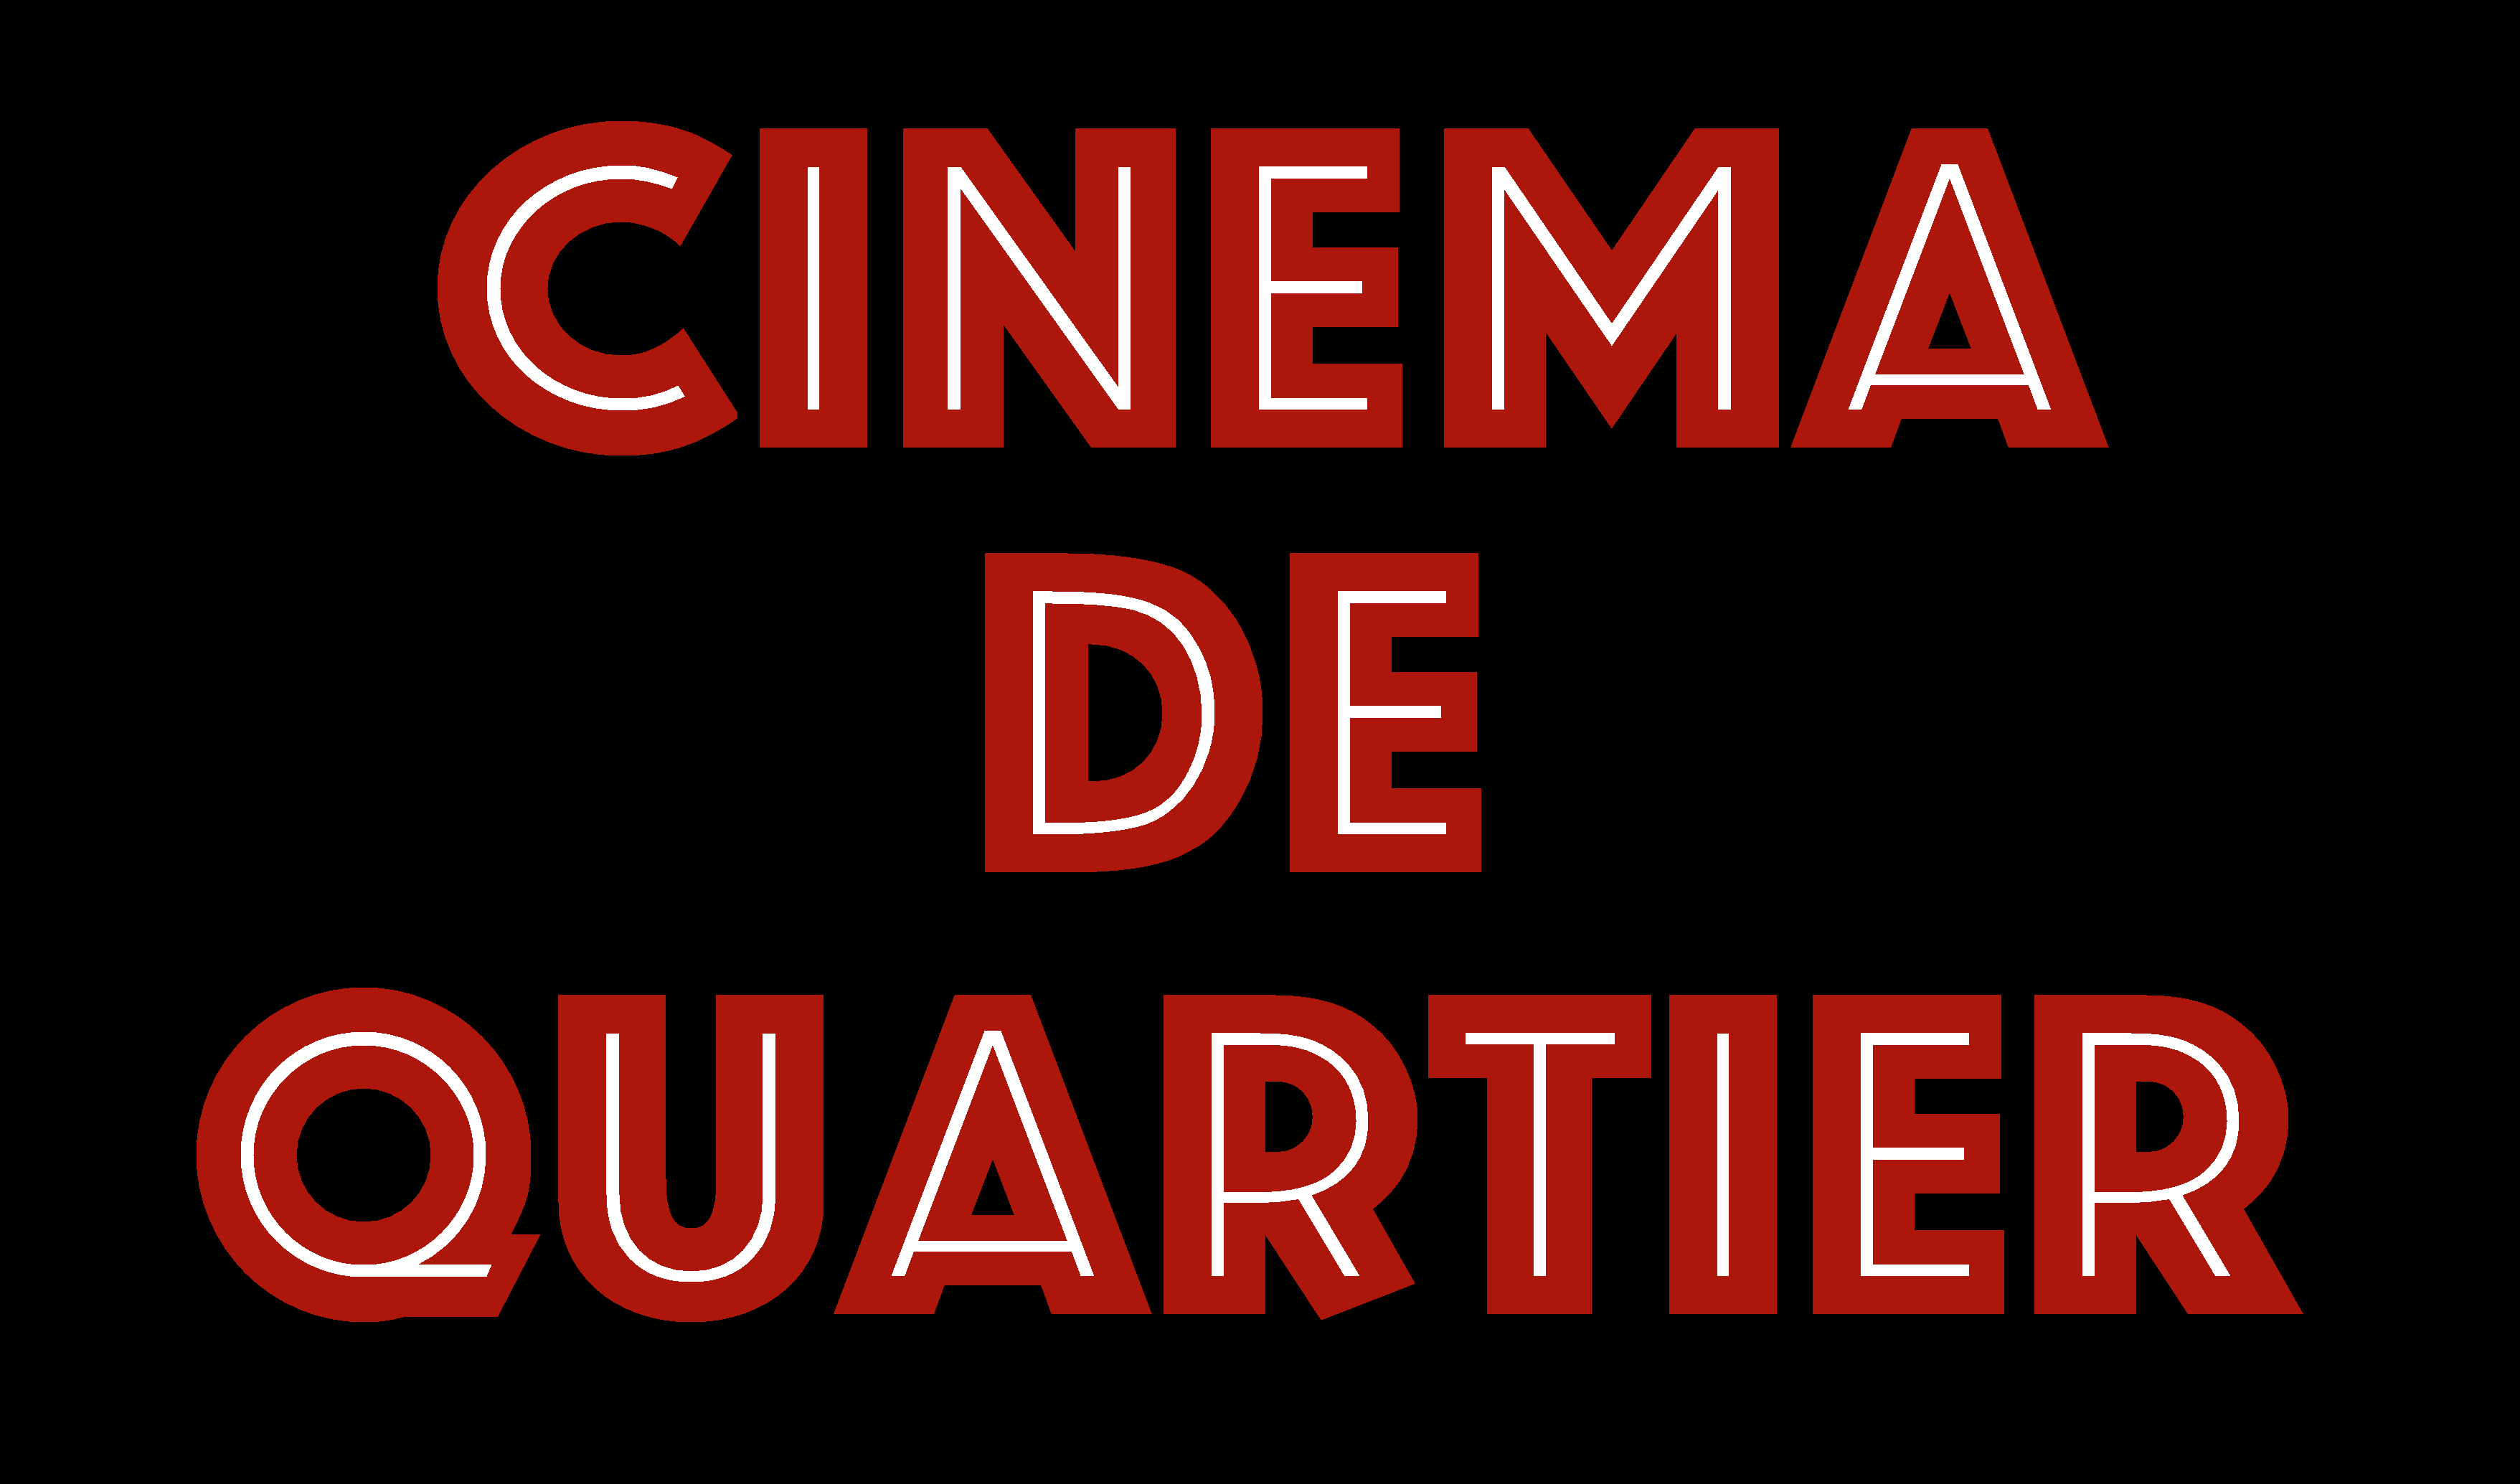 Cinemadequartiercanal+1989.png